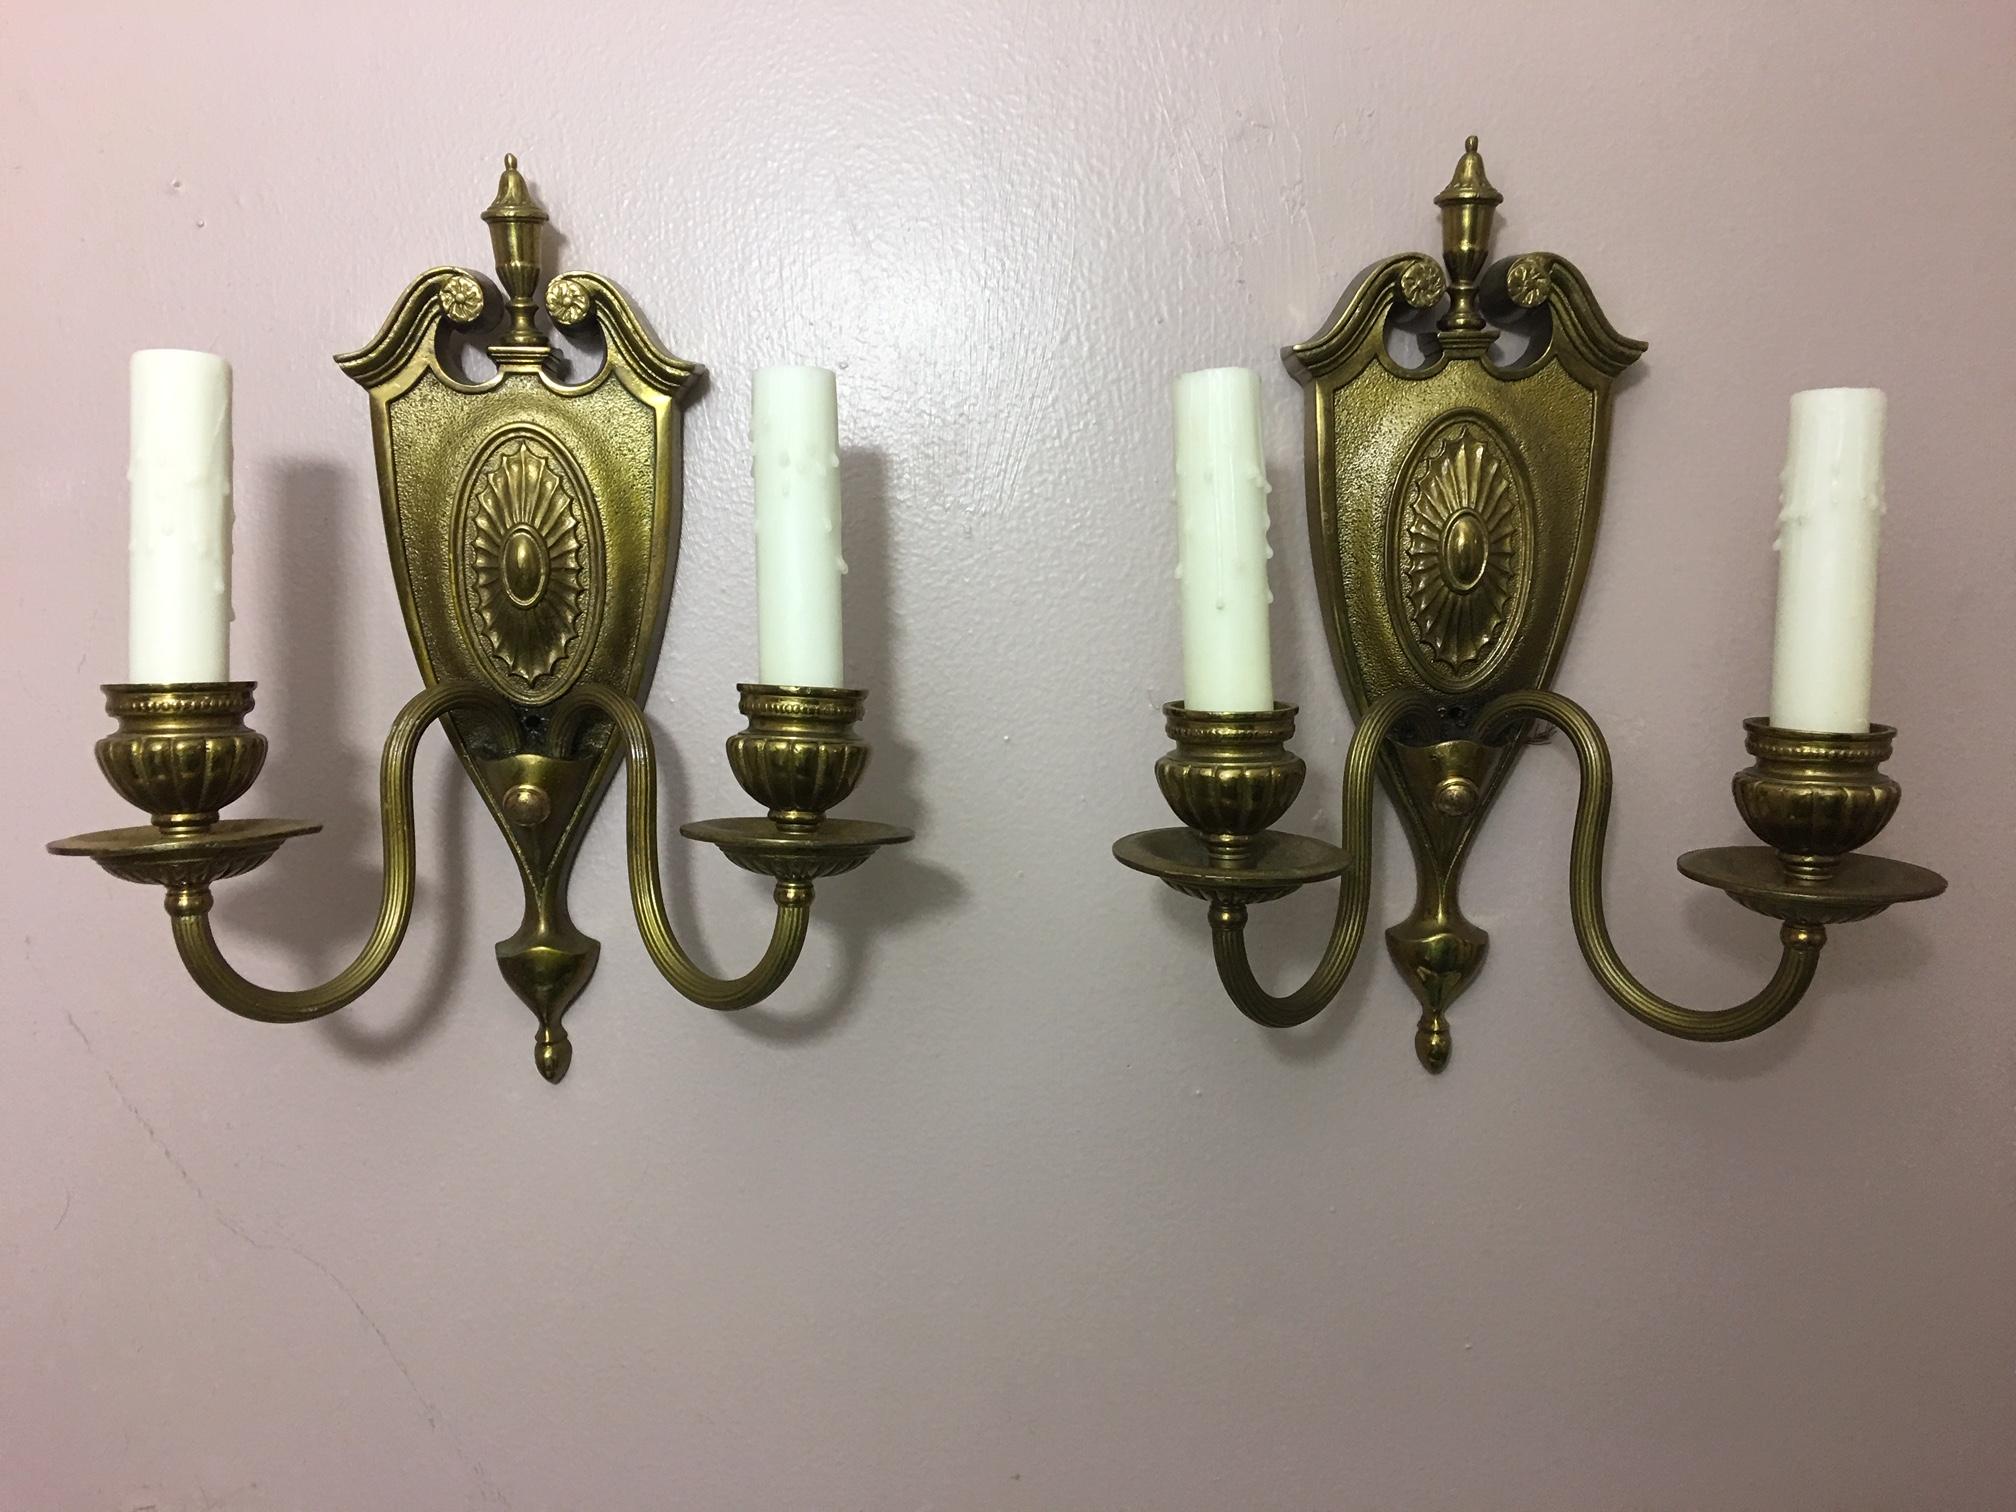 Pair of two-light shield back brass sconces, 20th century.